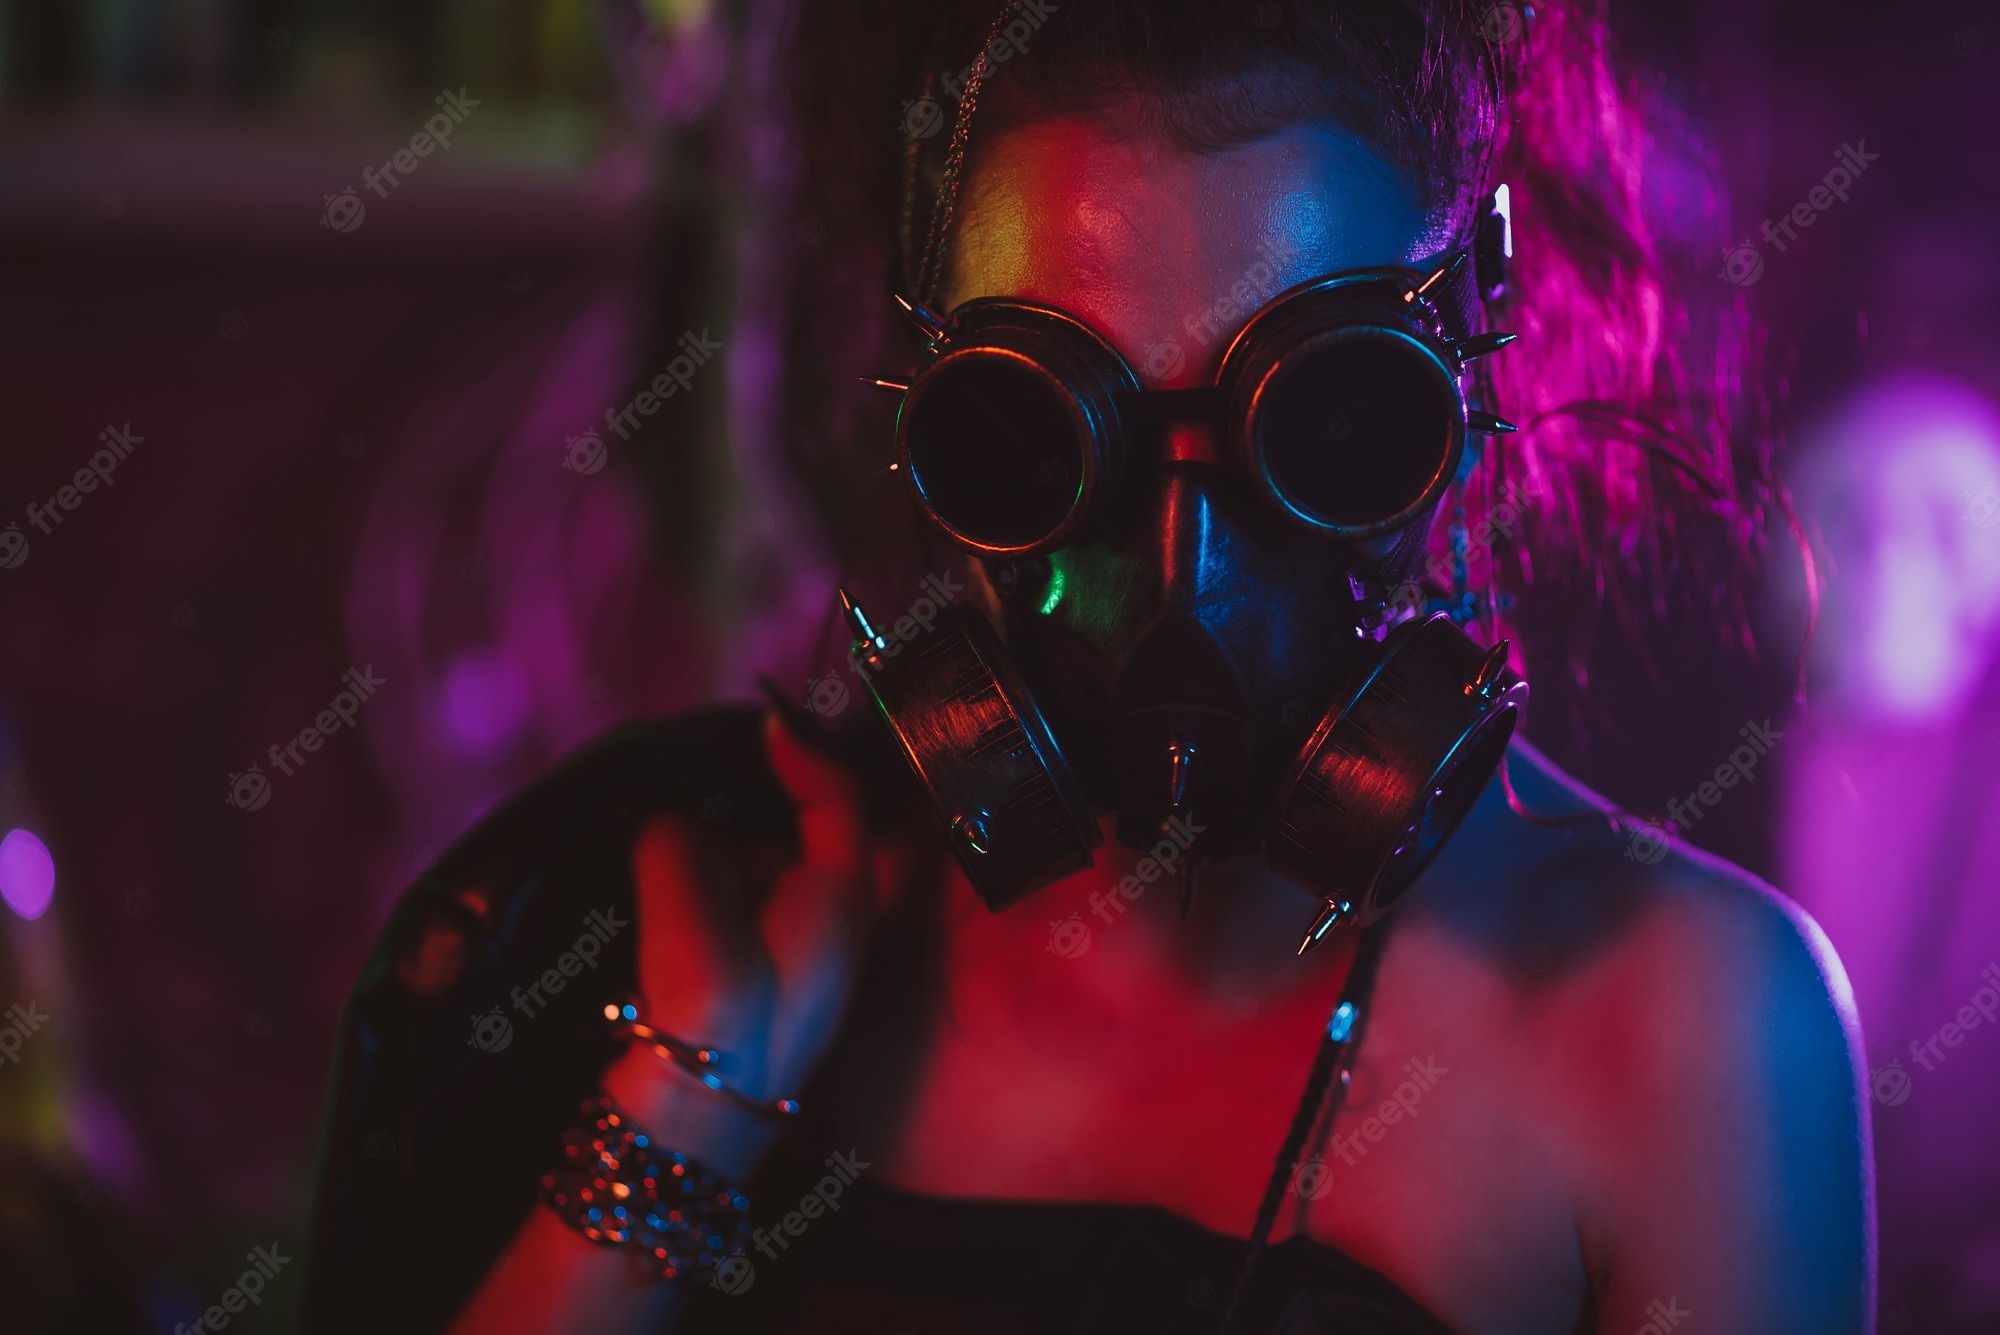 Premium Photo. Portrait Of A Cyberpunk Girl In A Gas Mask And Glasses In The Style Of The Post Apocalypse. Steampunk Style With Neon Light